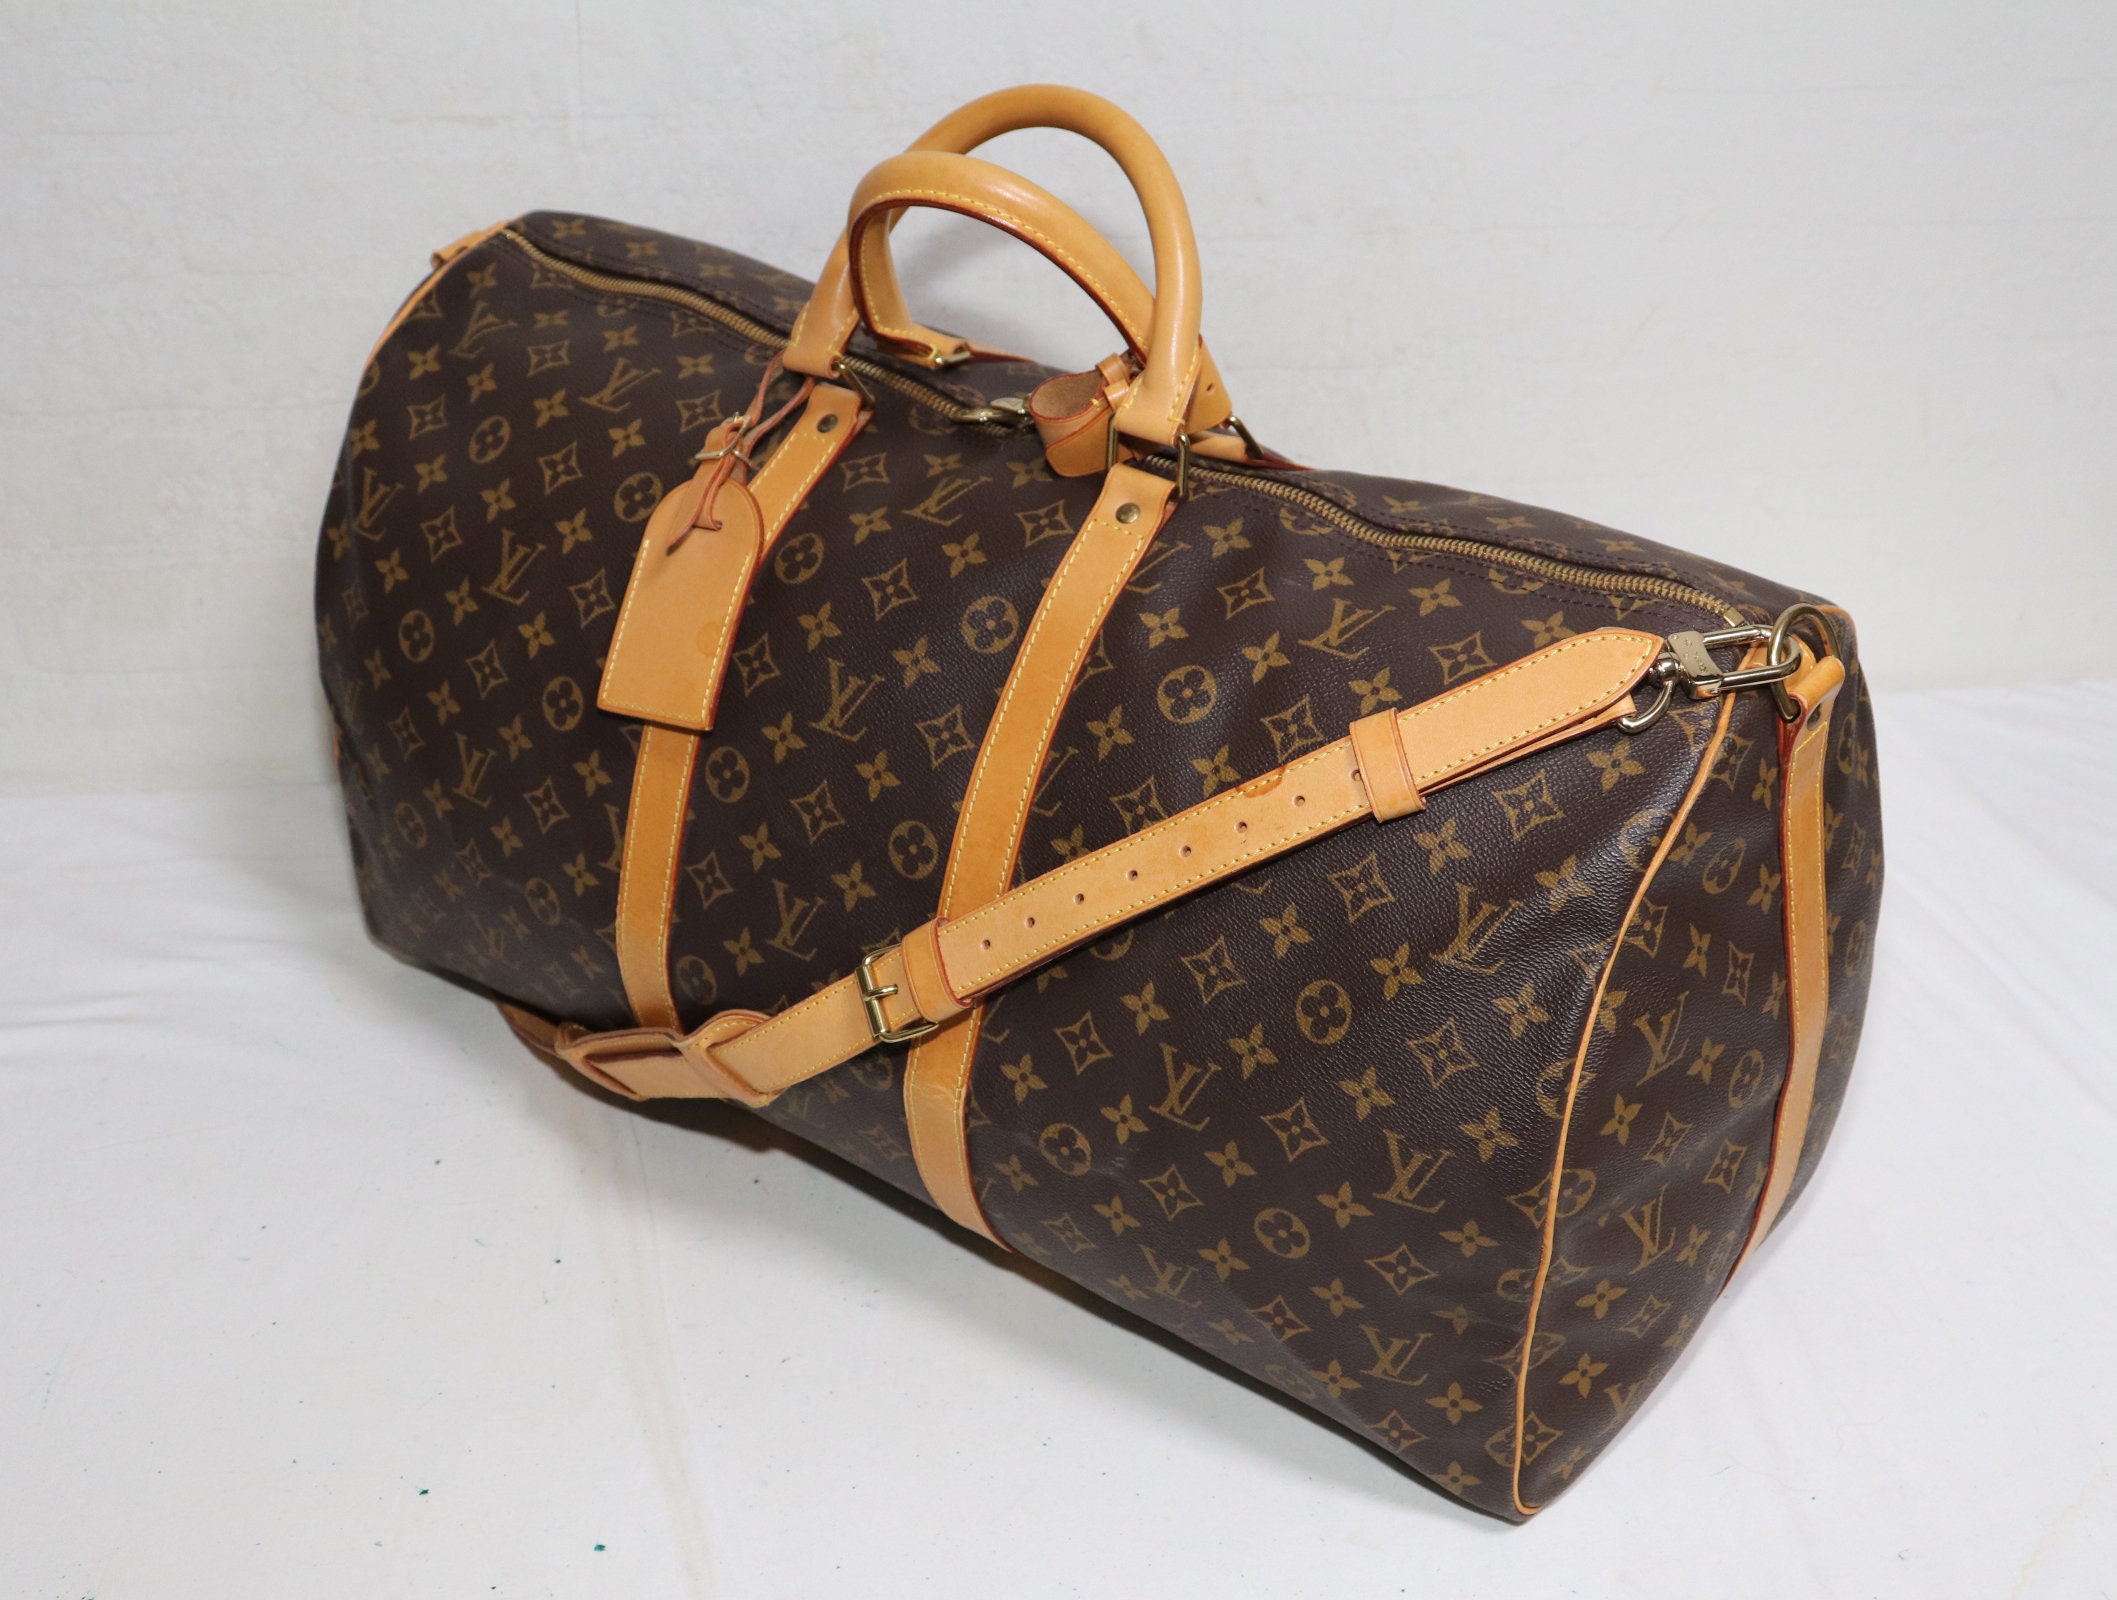 Shop for Louis Vuitton Black Epi Leather Keepall 60 cm Duffle Bag Luggage -  Shipped from USA